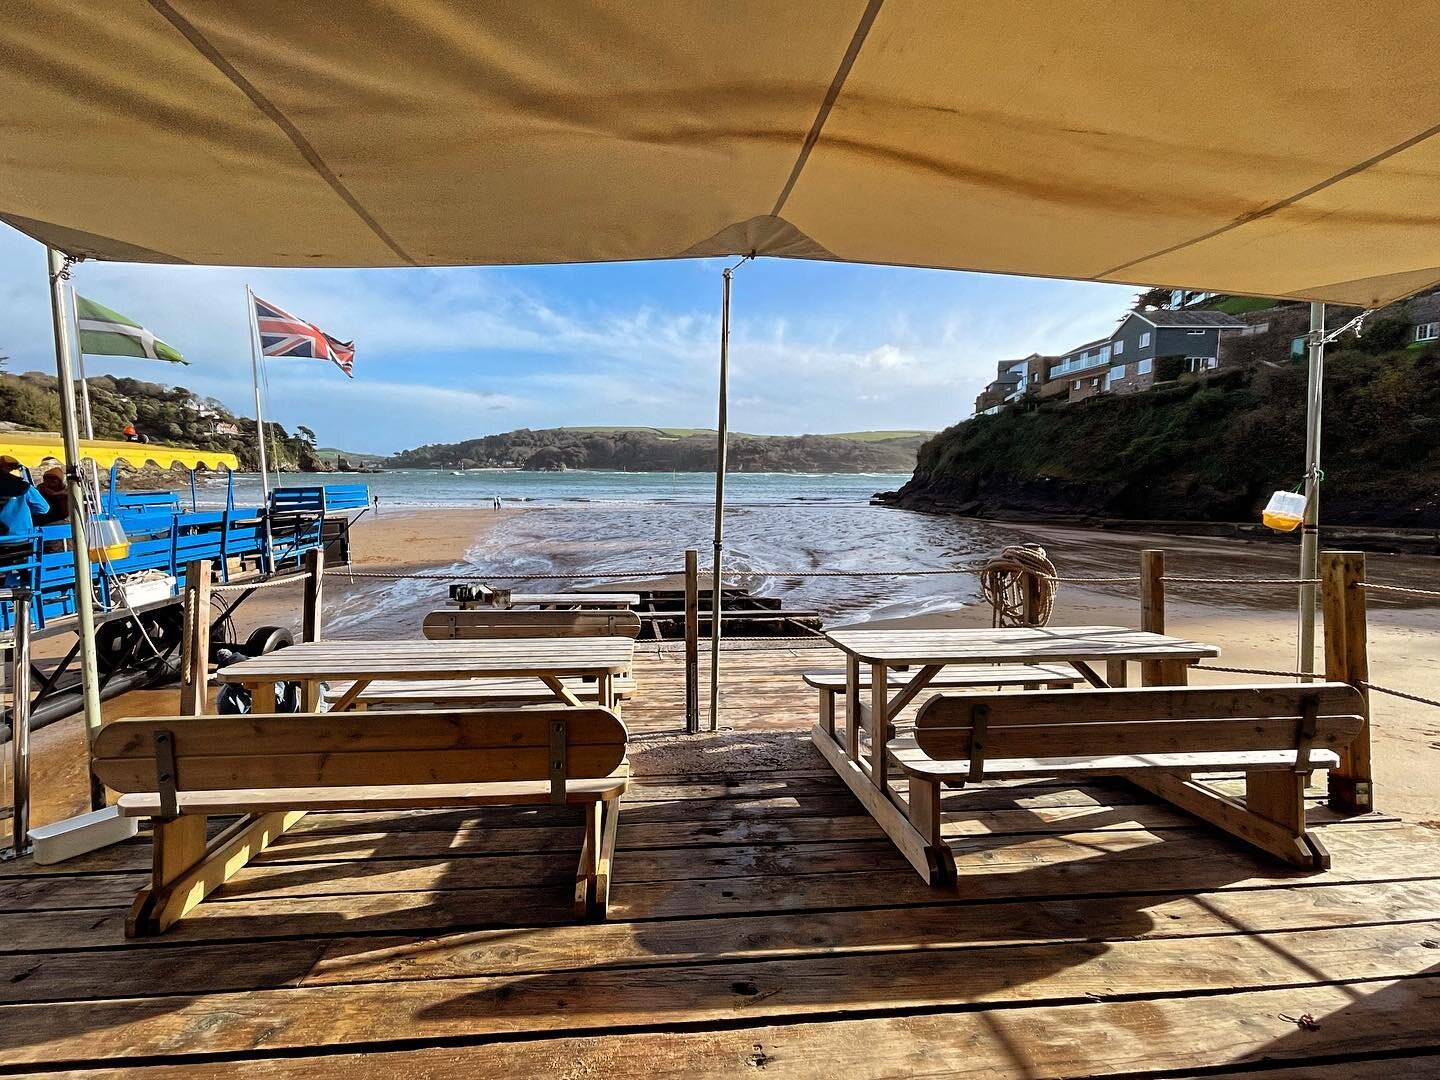 29.10.23 The last day of the Season has arrived! We will be open until 4pm Today weather permitting! #bosbeachcafe #southsands #salcombe #coffeewithaview #pizzawithaview #southsandsferry #devon #staycation #beachcafe #beachlife #beachvibes #familyrun